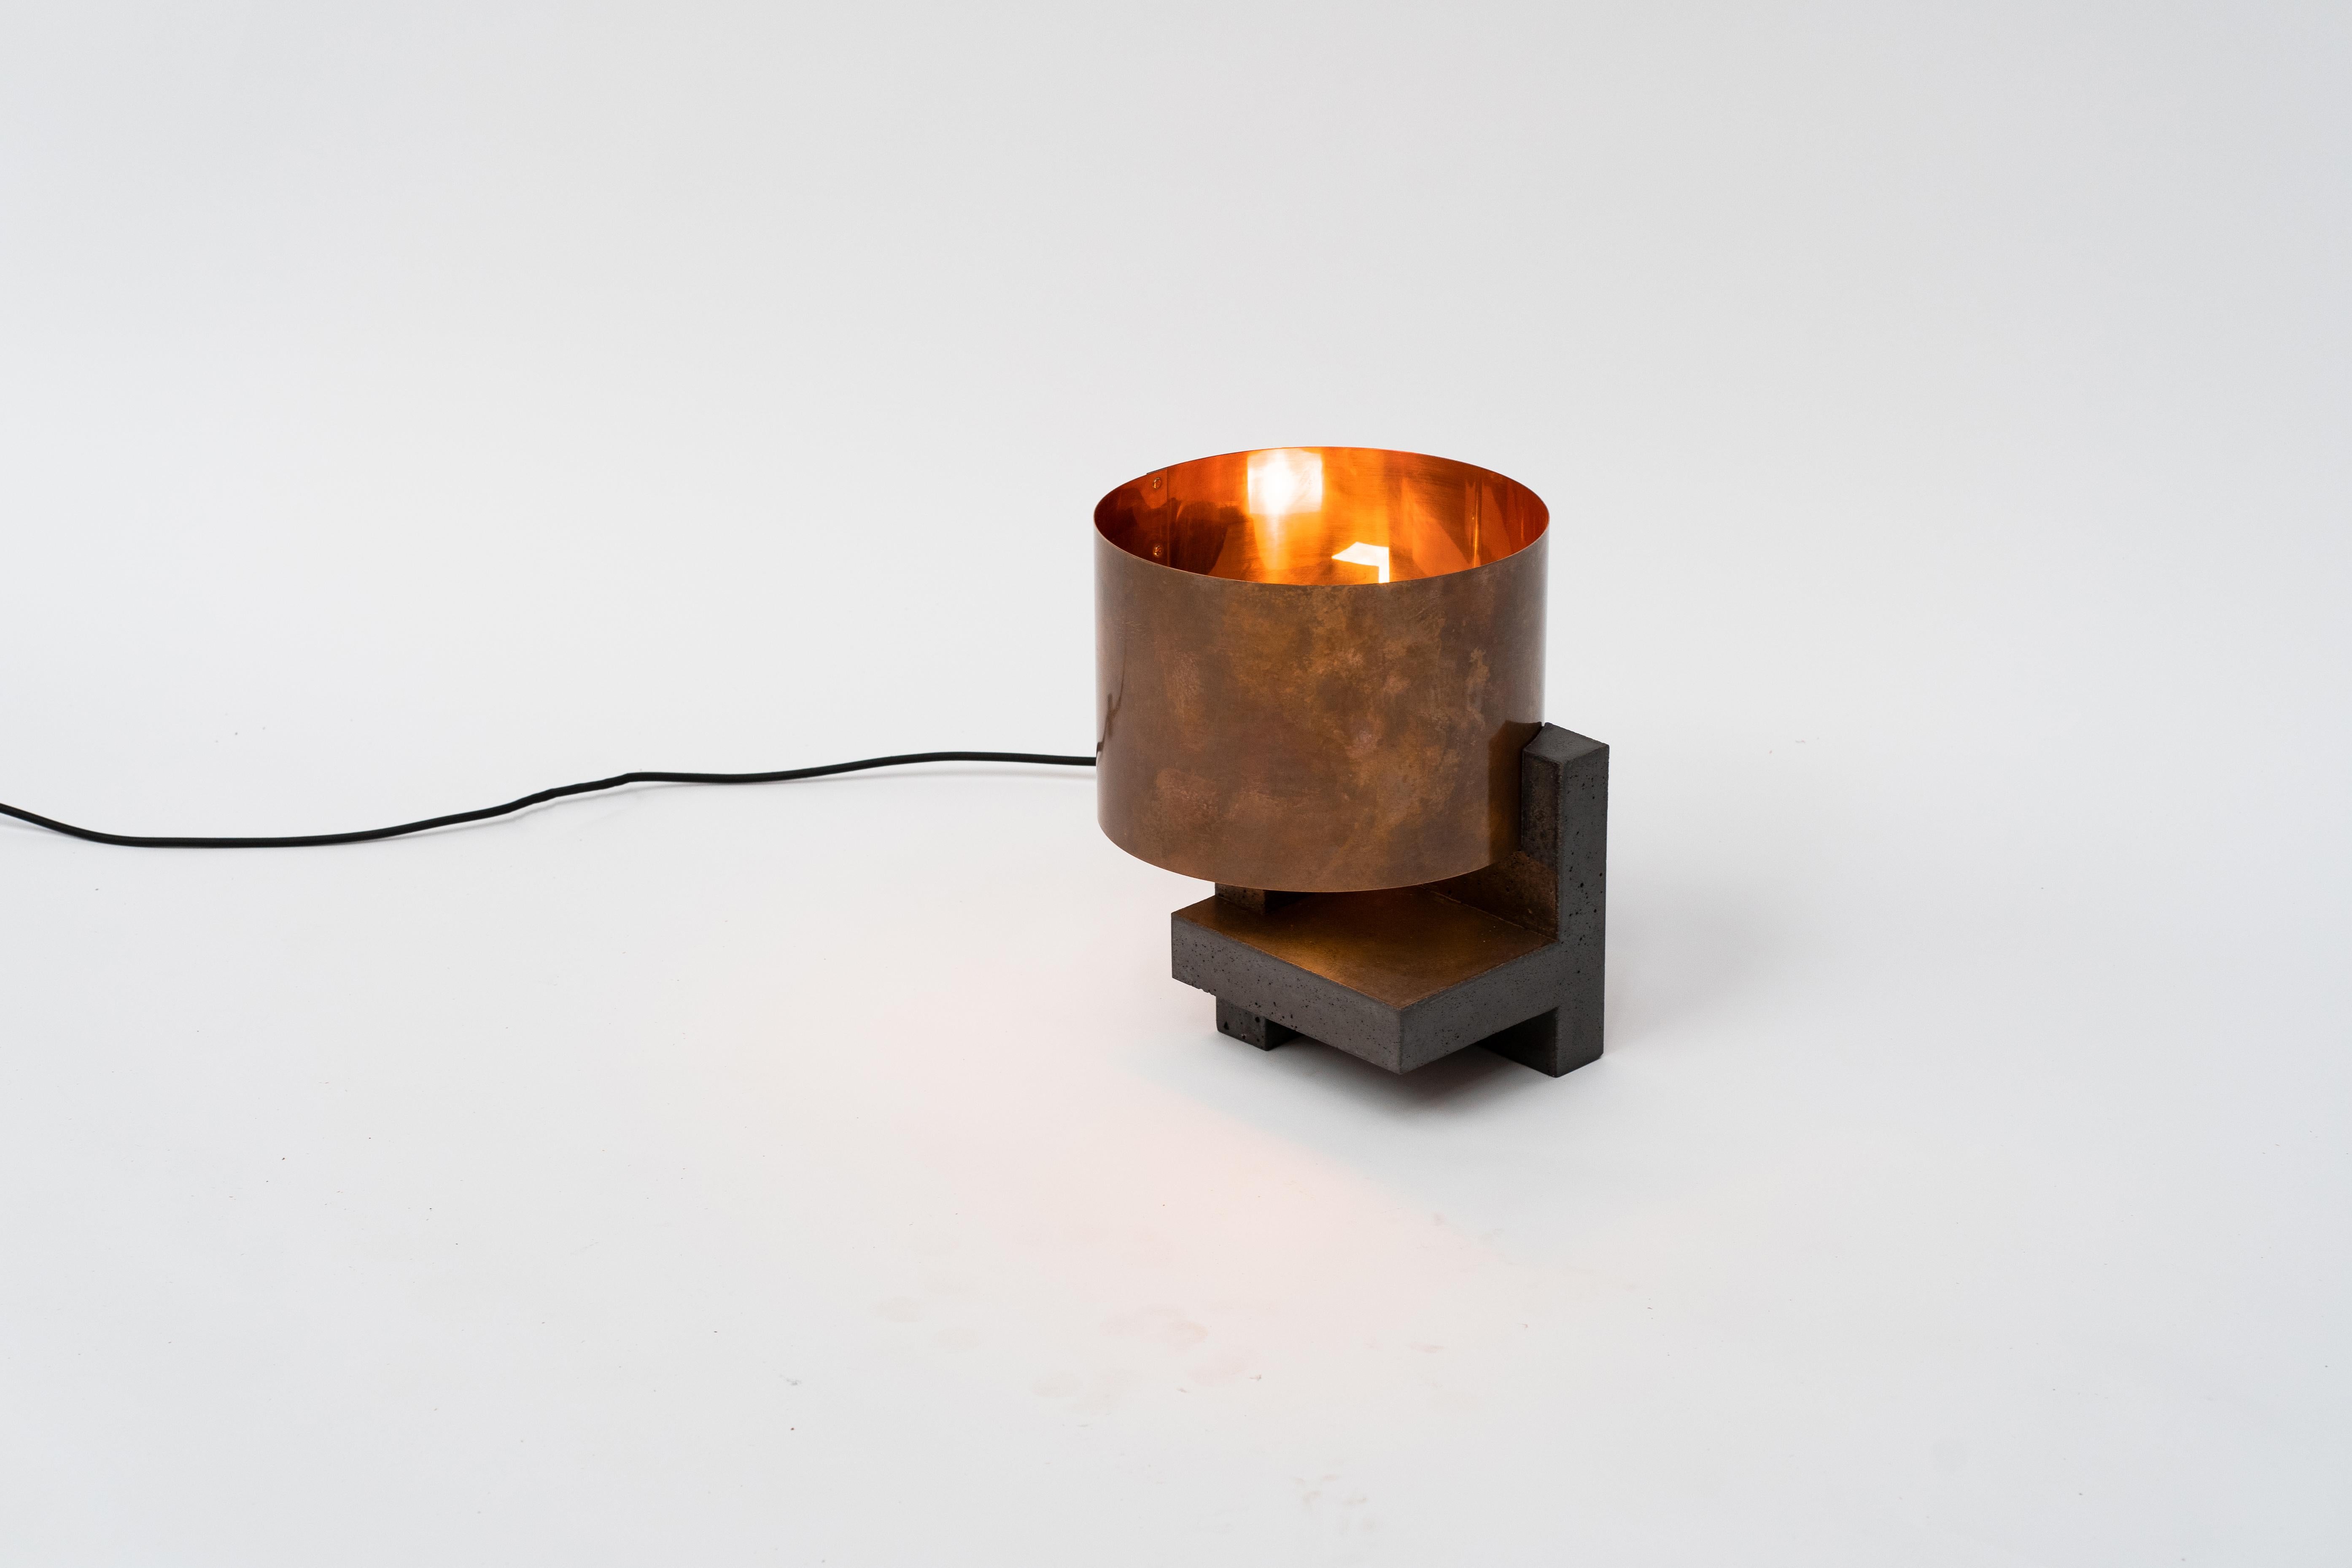 European Contemporary, Copper Prospect Table Lamp by Studio ThusThat For Sale